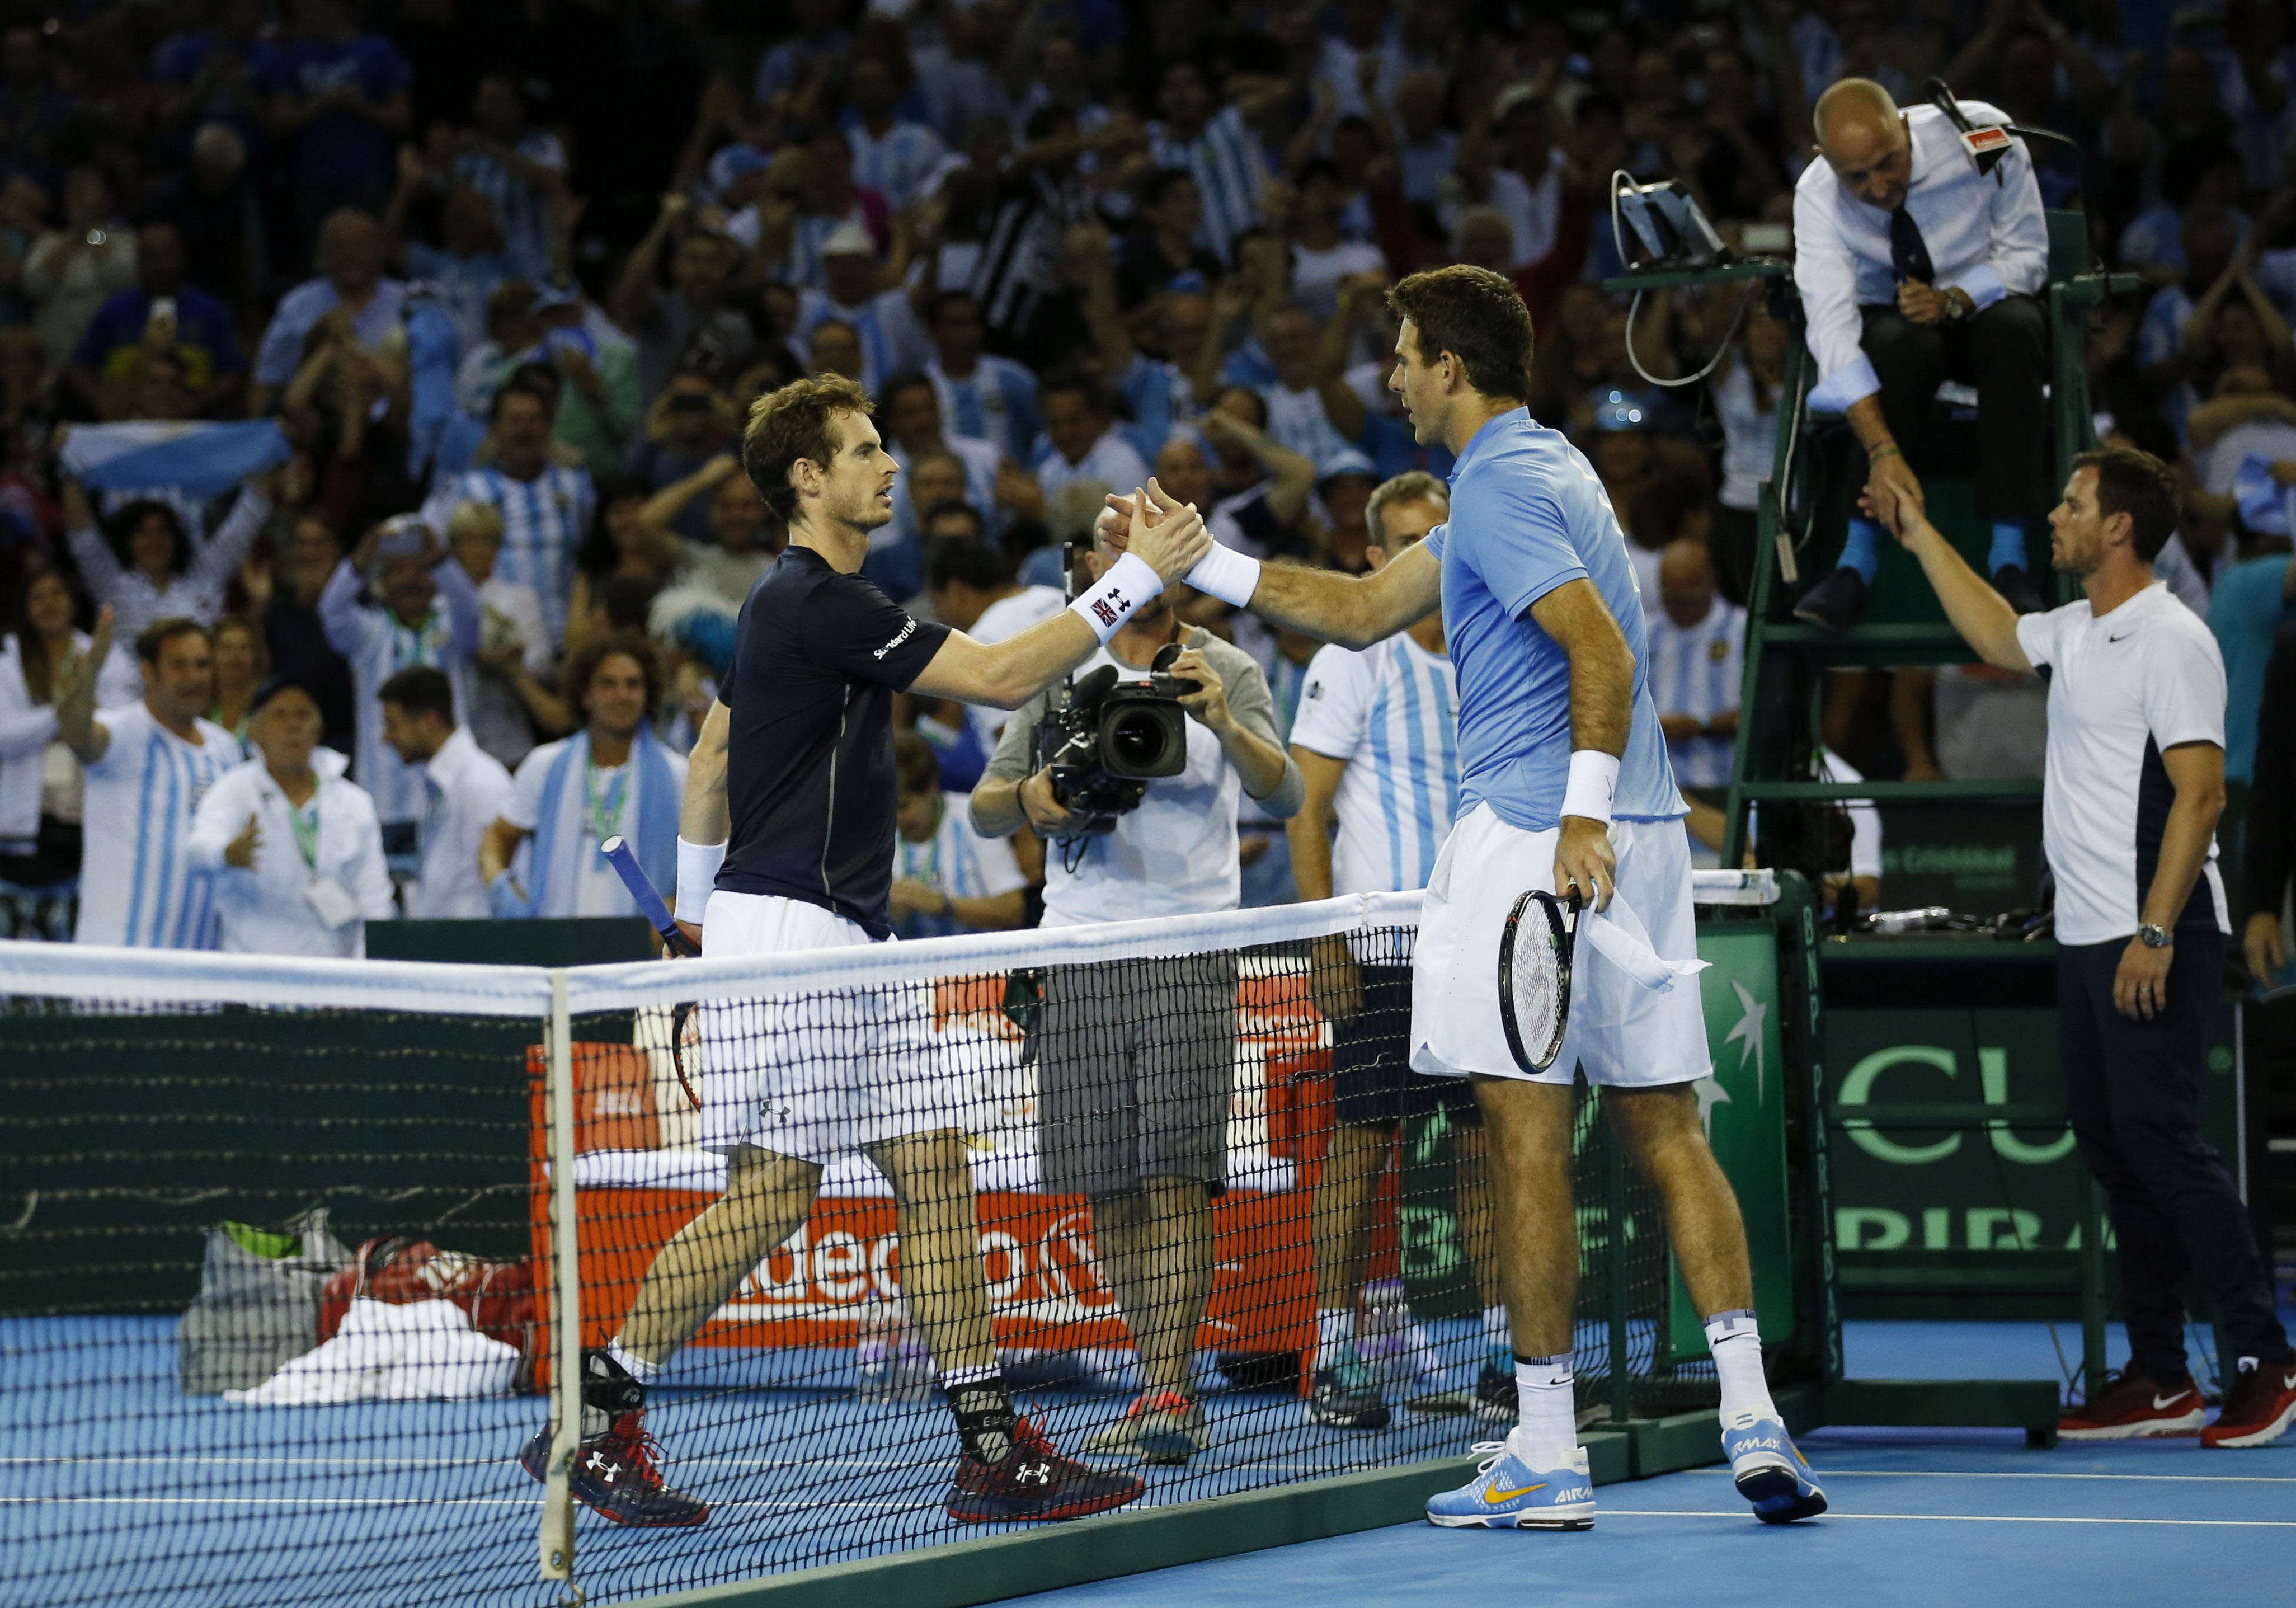 Davis Cup: Del Potro sinks Murray in five-hour epic to give Argentina 1-0 lead